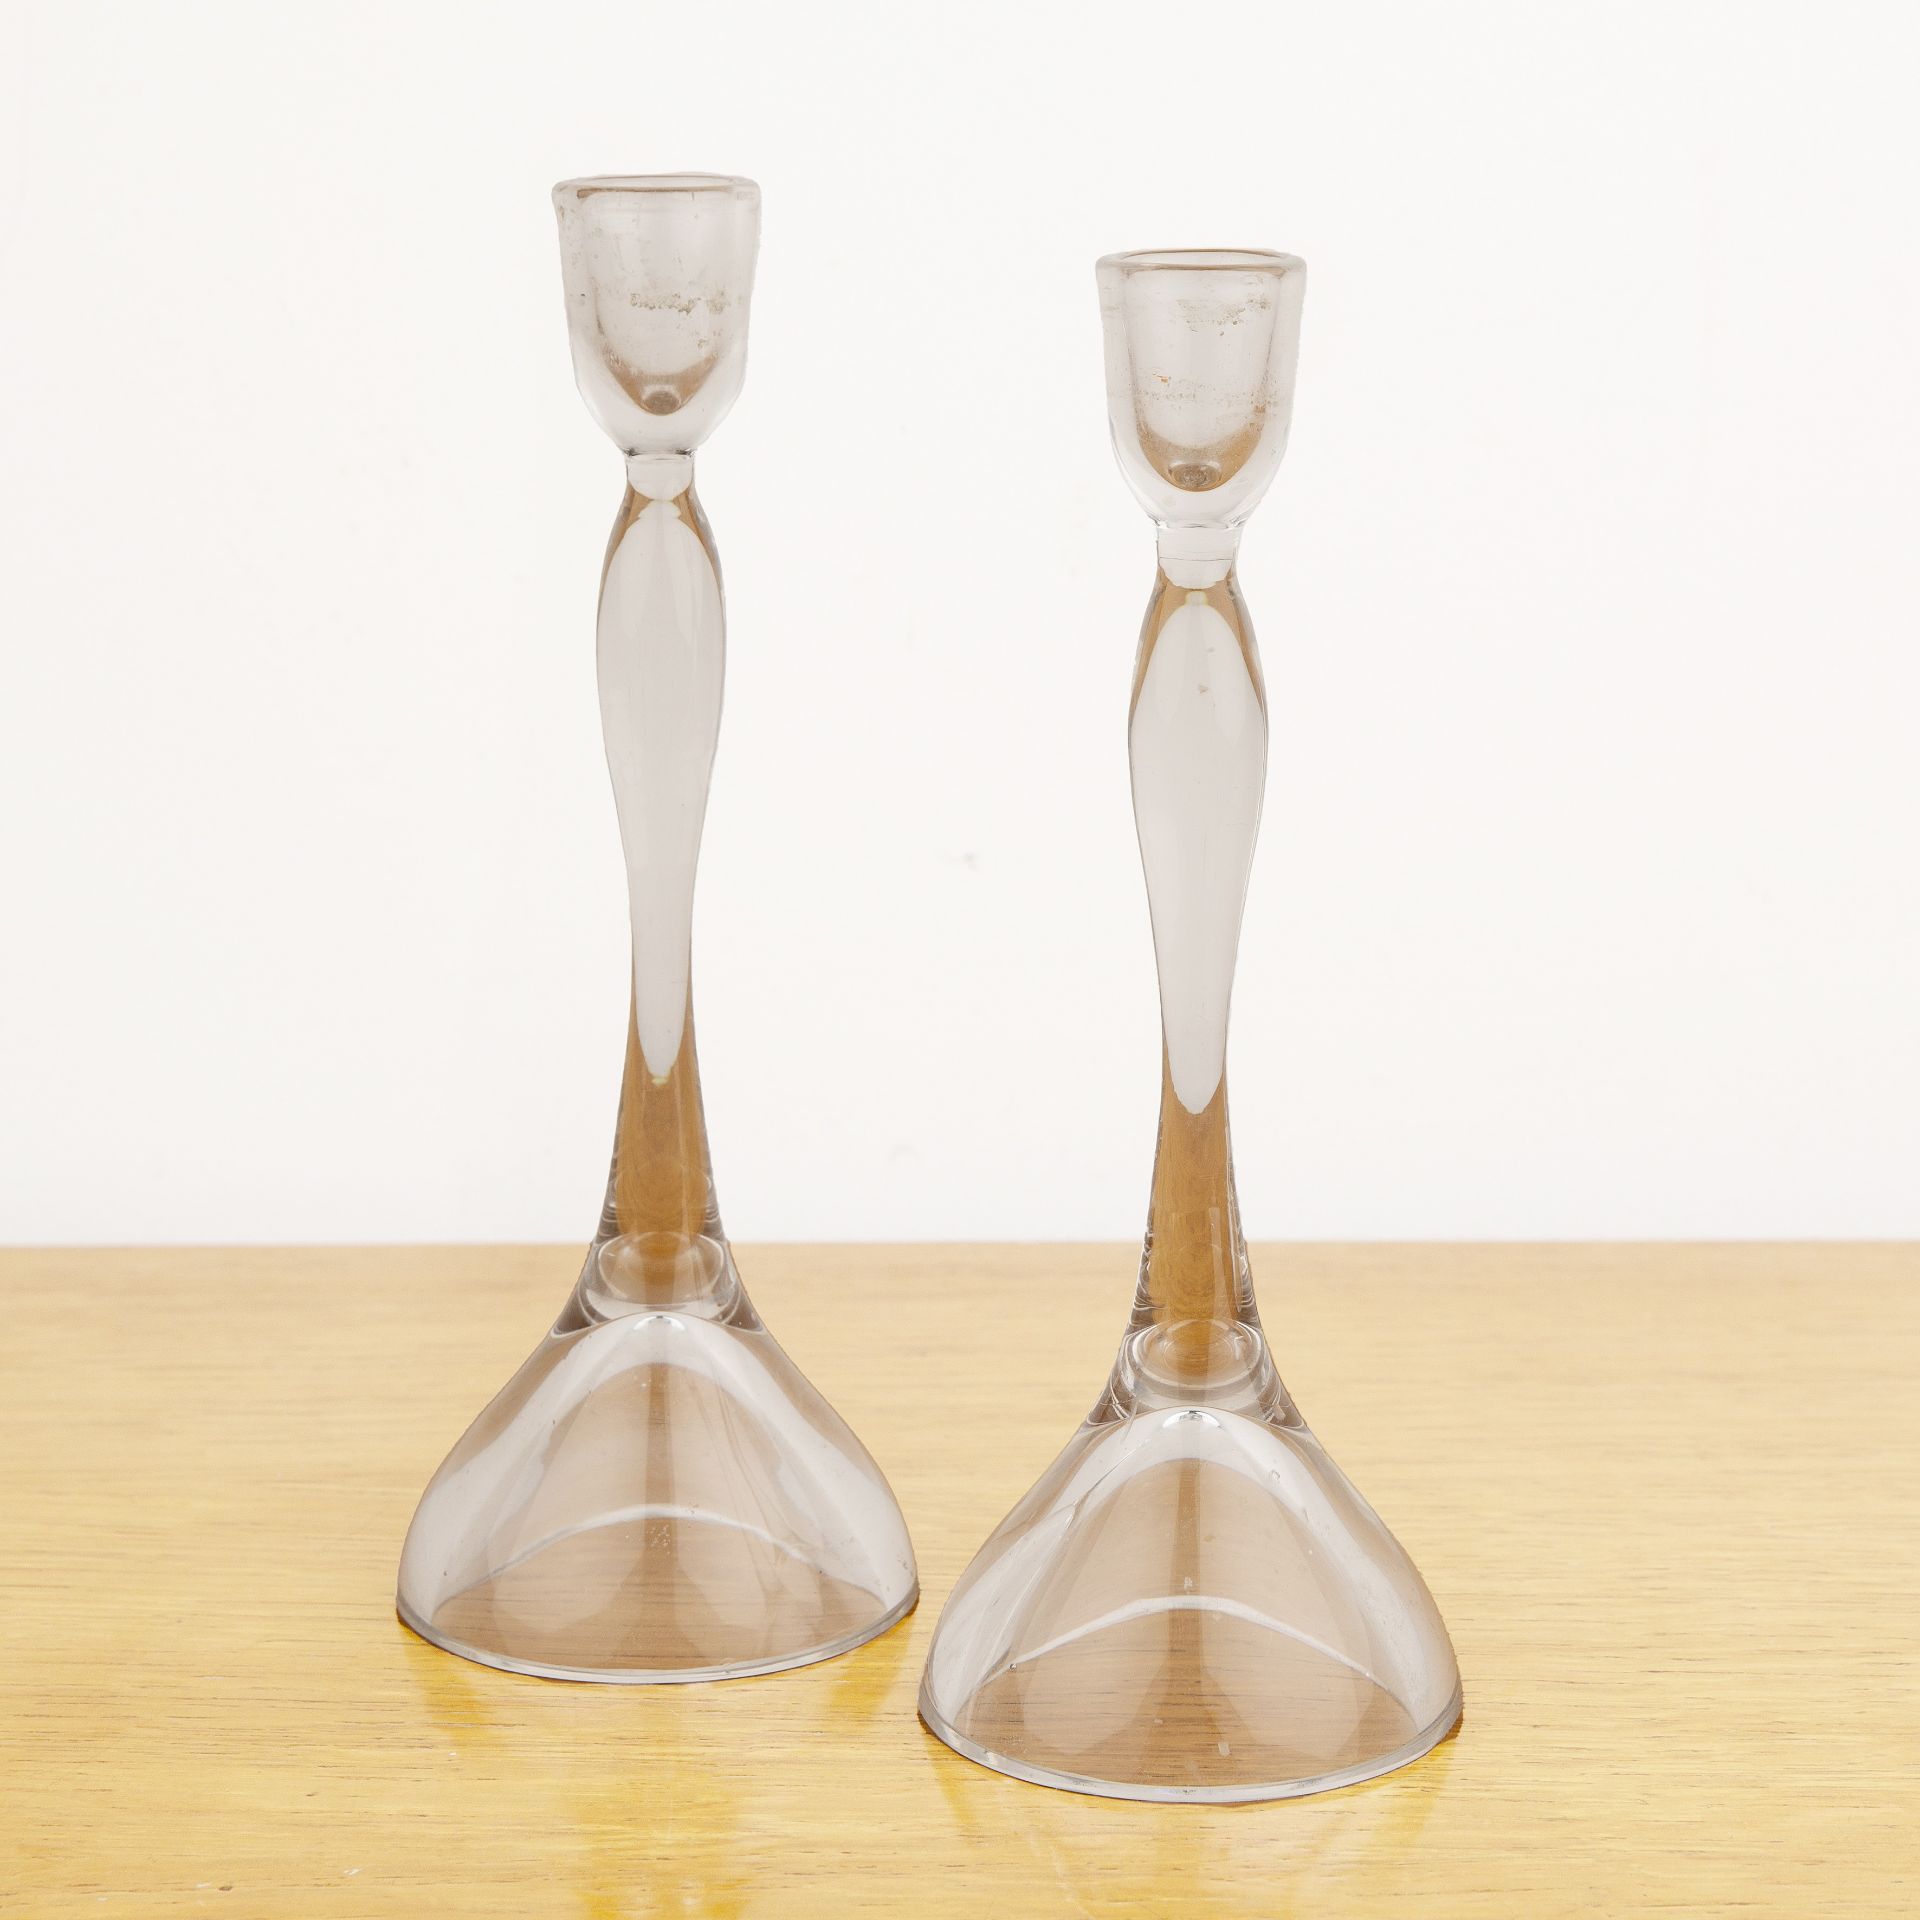 Attributed to Vicke Lindstrand (1904-1983) for Kosta Boda pair of glass candlesticks, with - Image 2 of 3